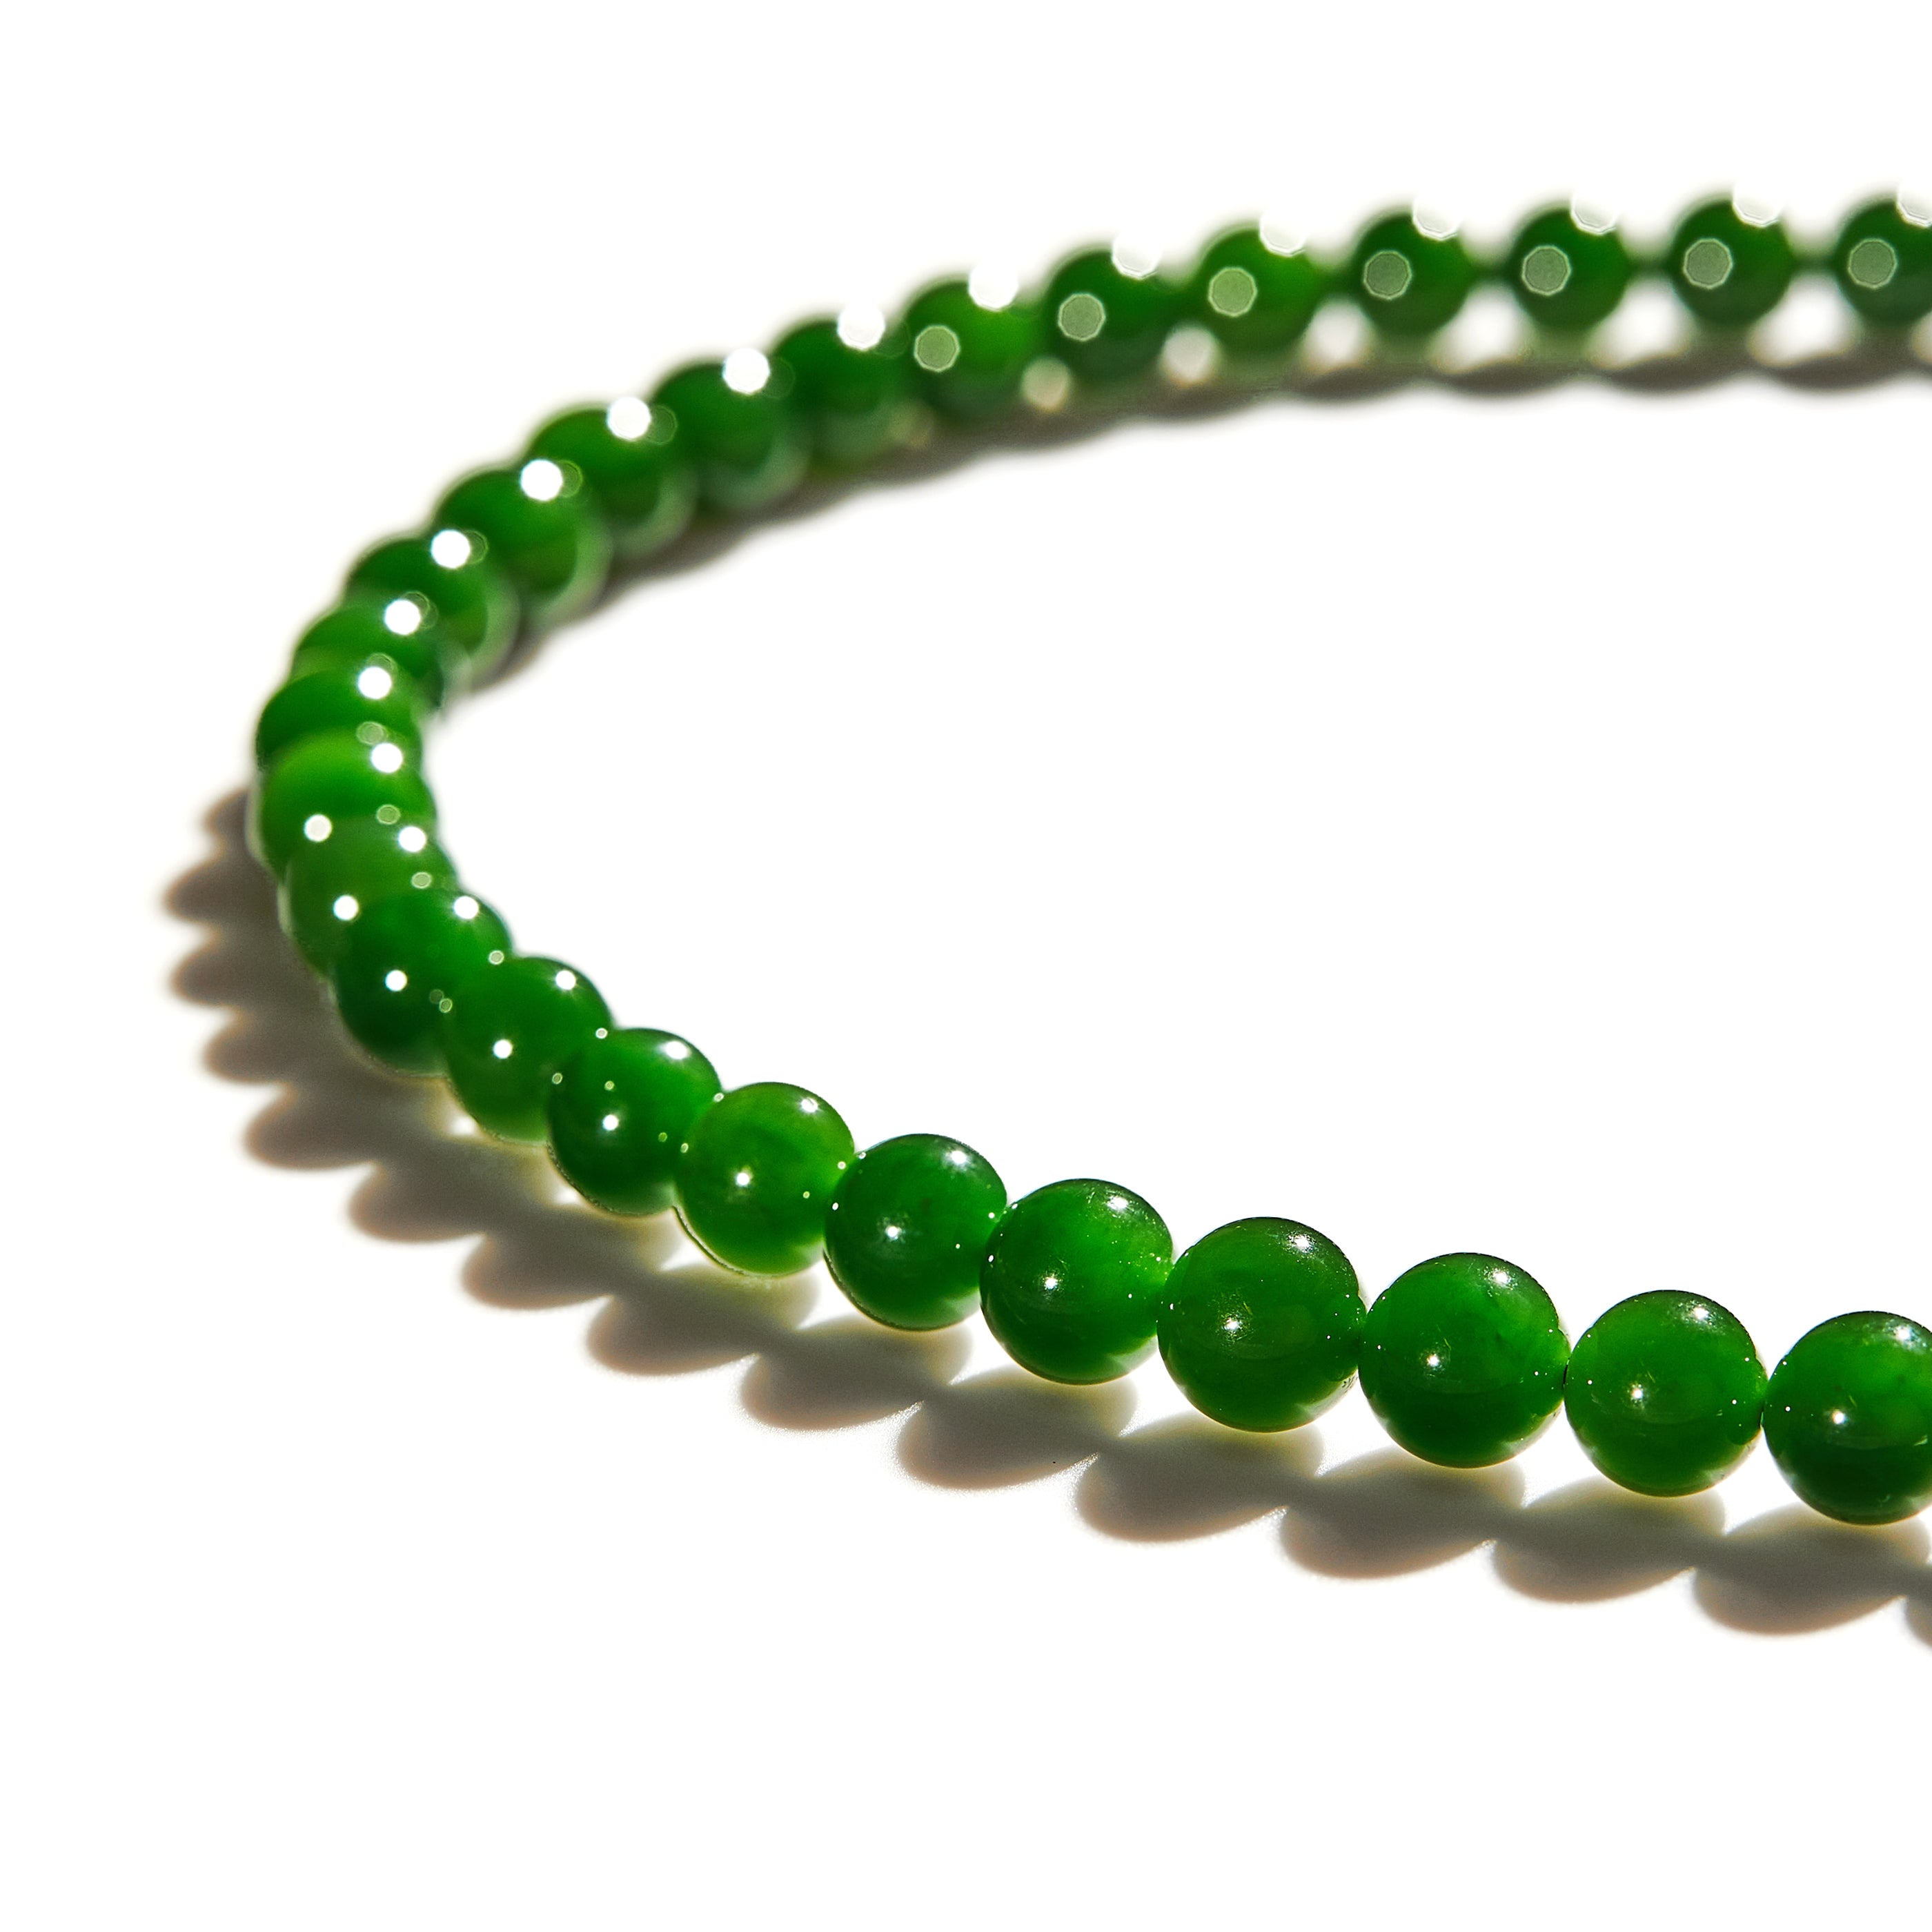 Crystal healing Jade necklace known for increasing physical strength and promoting longevity